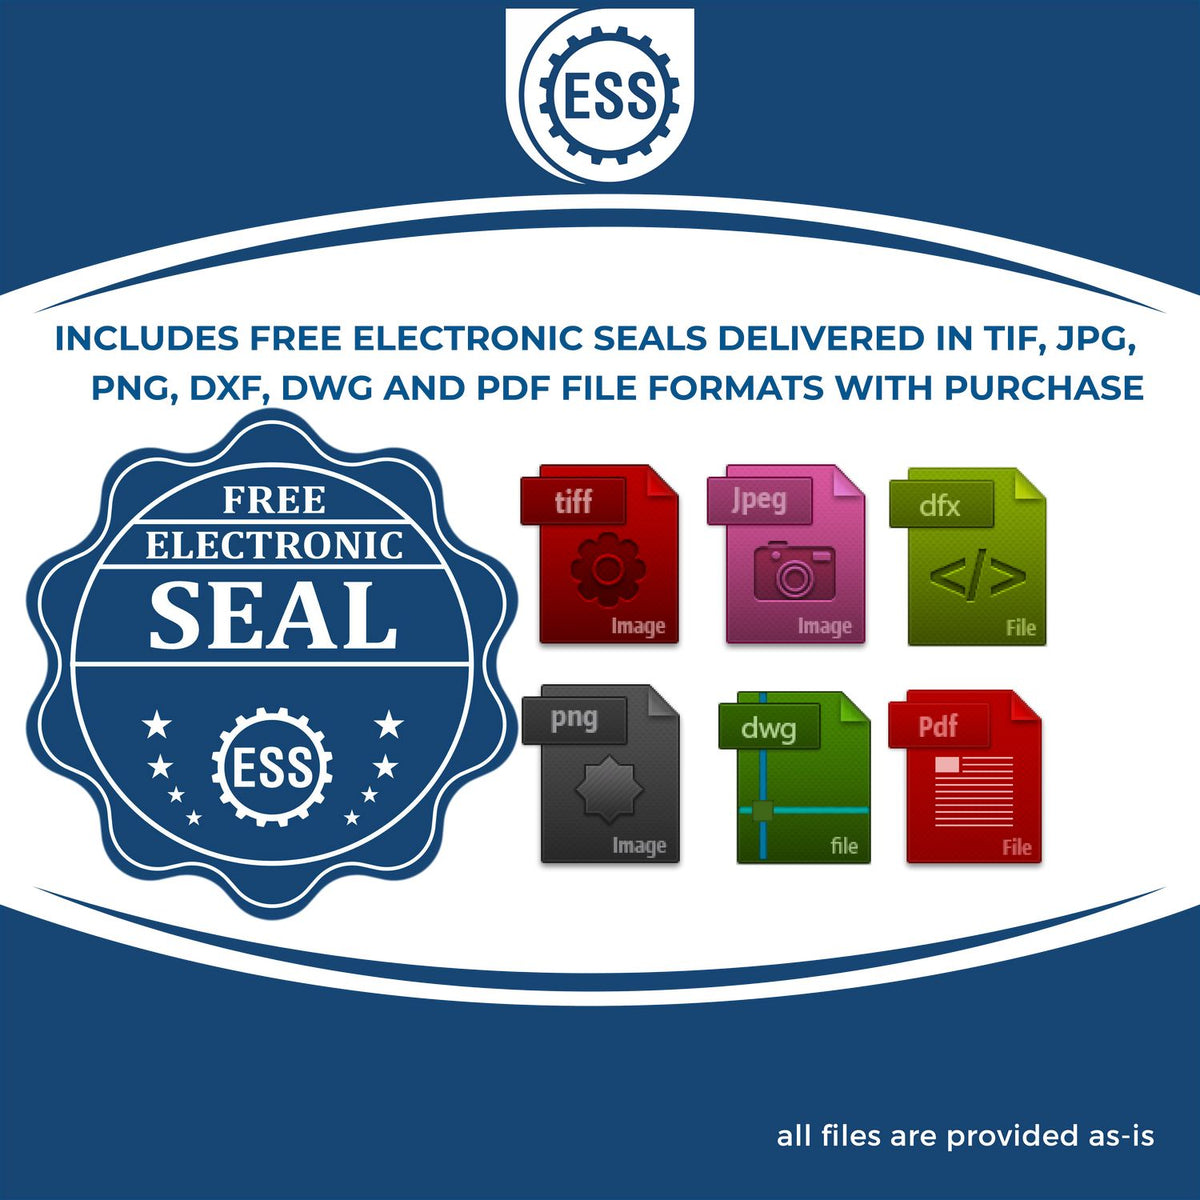 An infographic for the free electronic seal for the Slim Pre-Inked Kansas Architect Seal Stamp illustrating the different file type icons such as DXF, DWG, TIF, JPG and PNG.